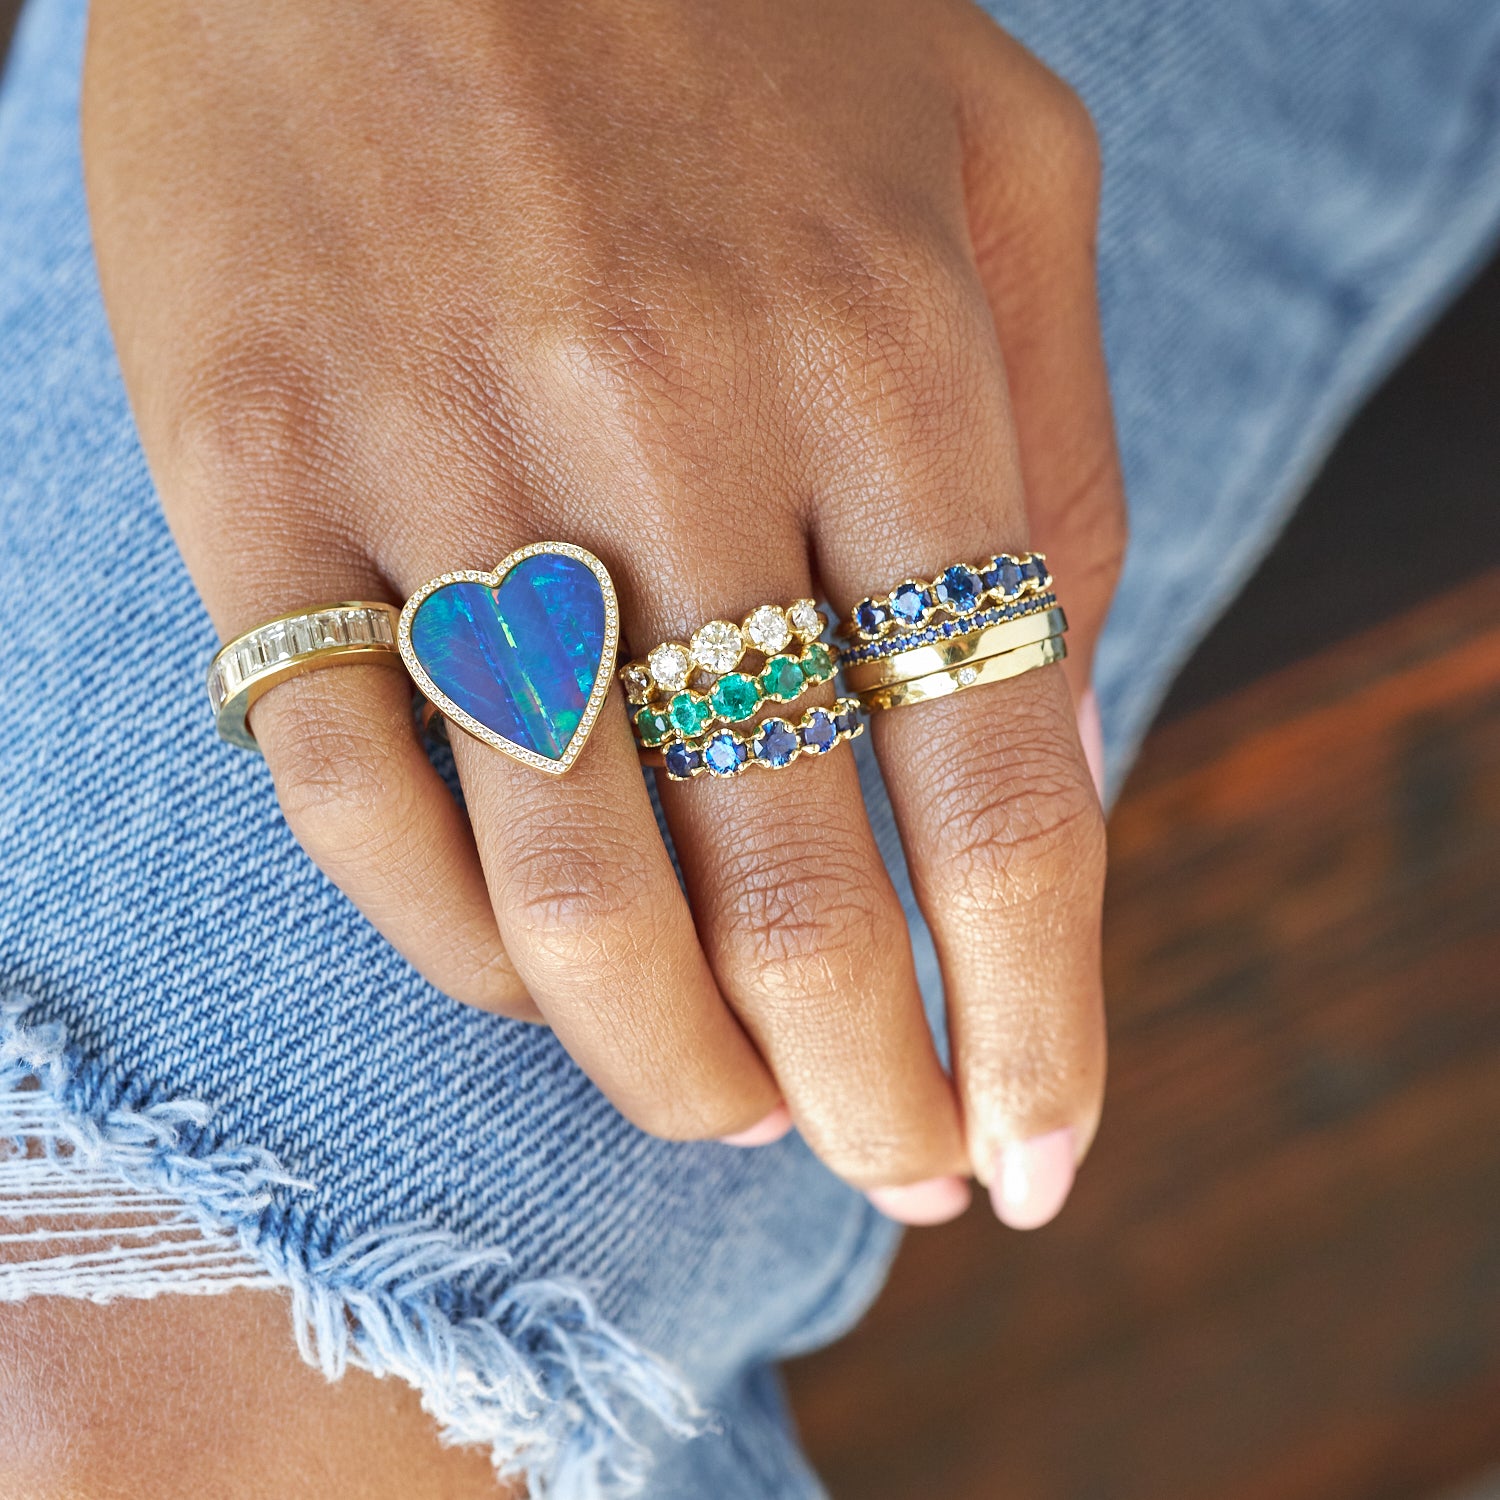 Blue Boulder Opal Inlay Heart Ring with Diamonds